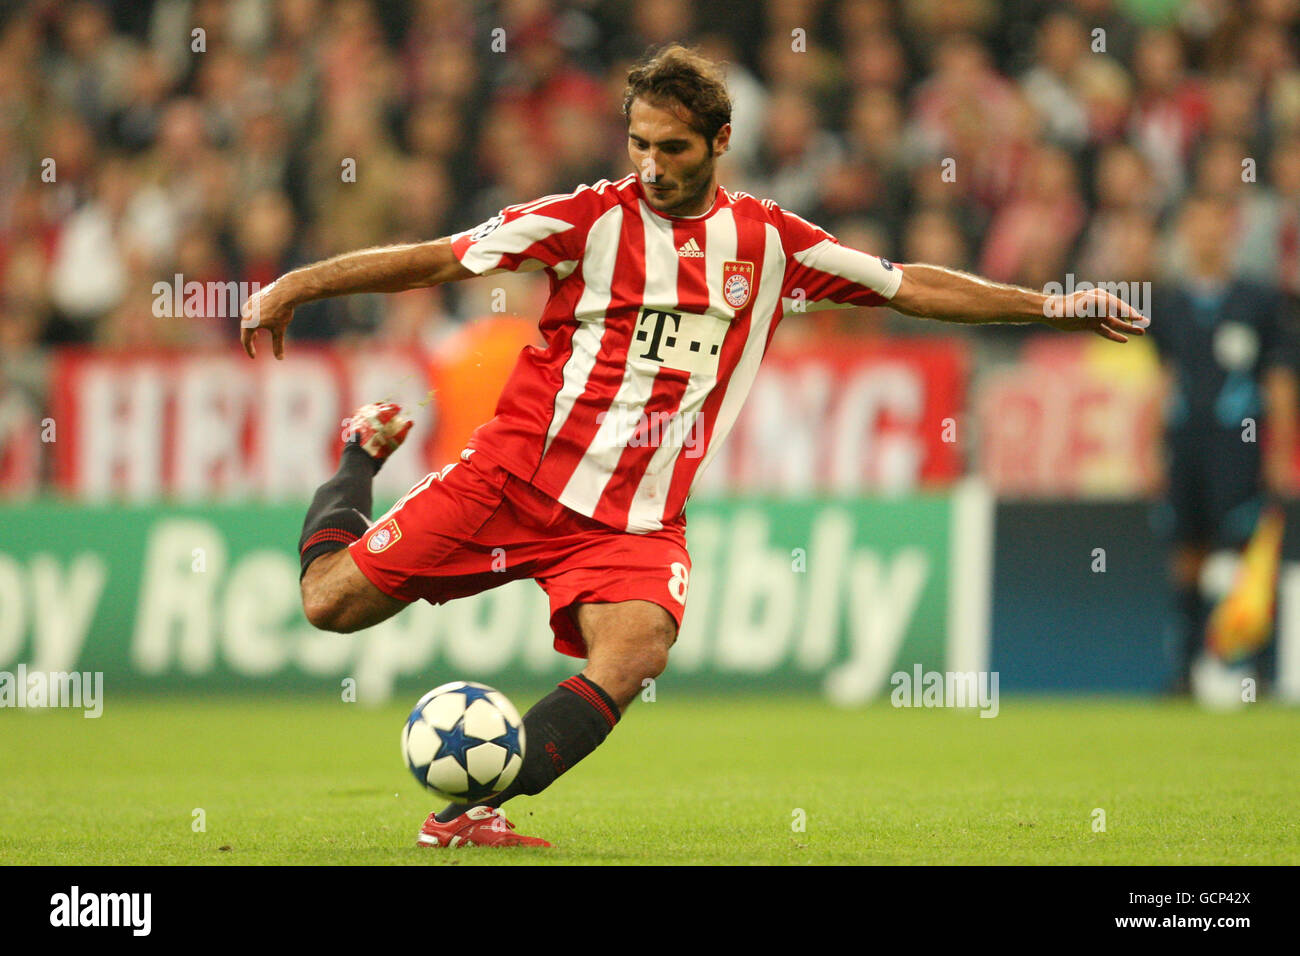 Bayern Munich V Roma High Resolution Stock Photography and Images - Alamy